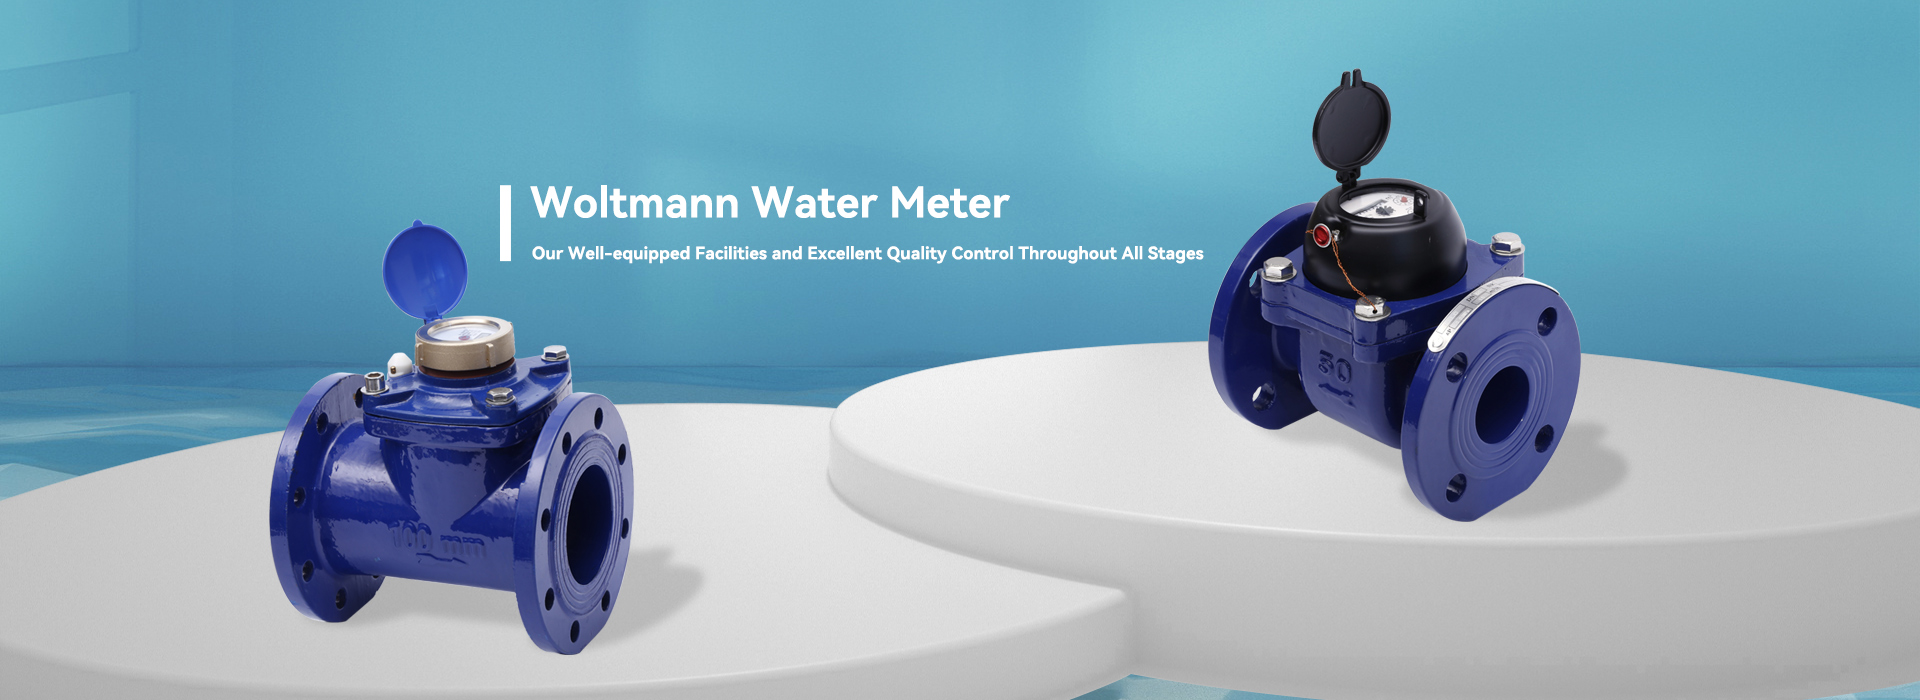 Woltmann Water Meter Manufacturers and Suppliers